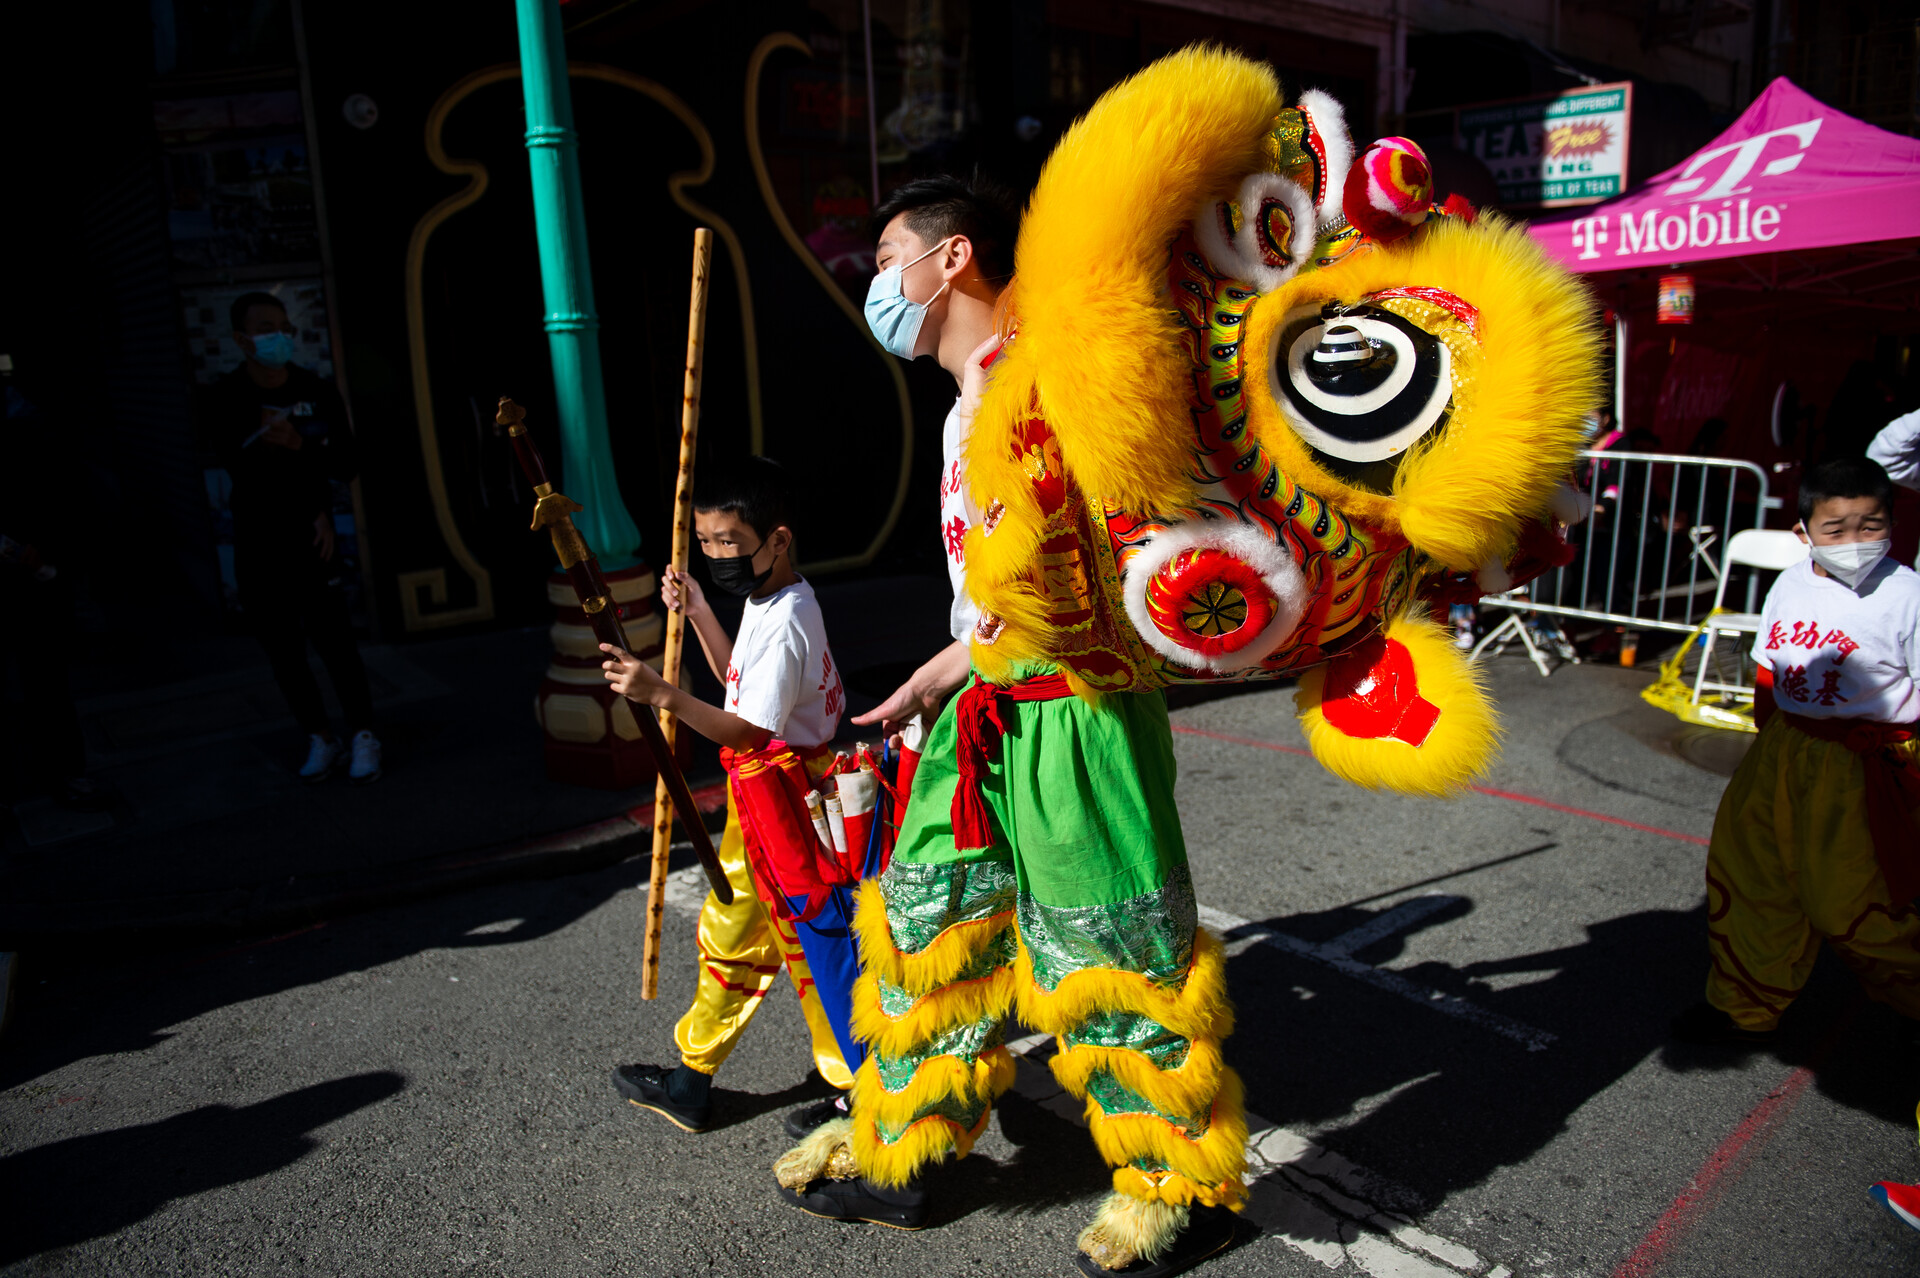 An Asian man carrying a large yellow dragon head, wearing green leggings with gold trim, walks with a young boy carrying a staff outside in Chinatown